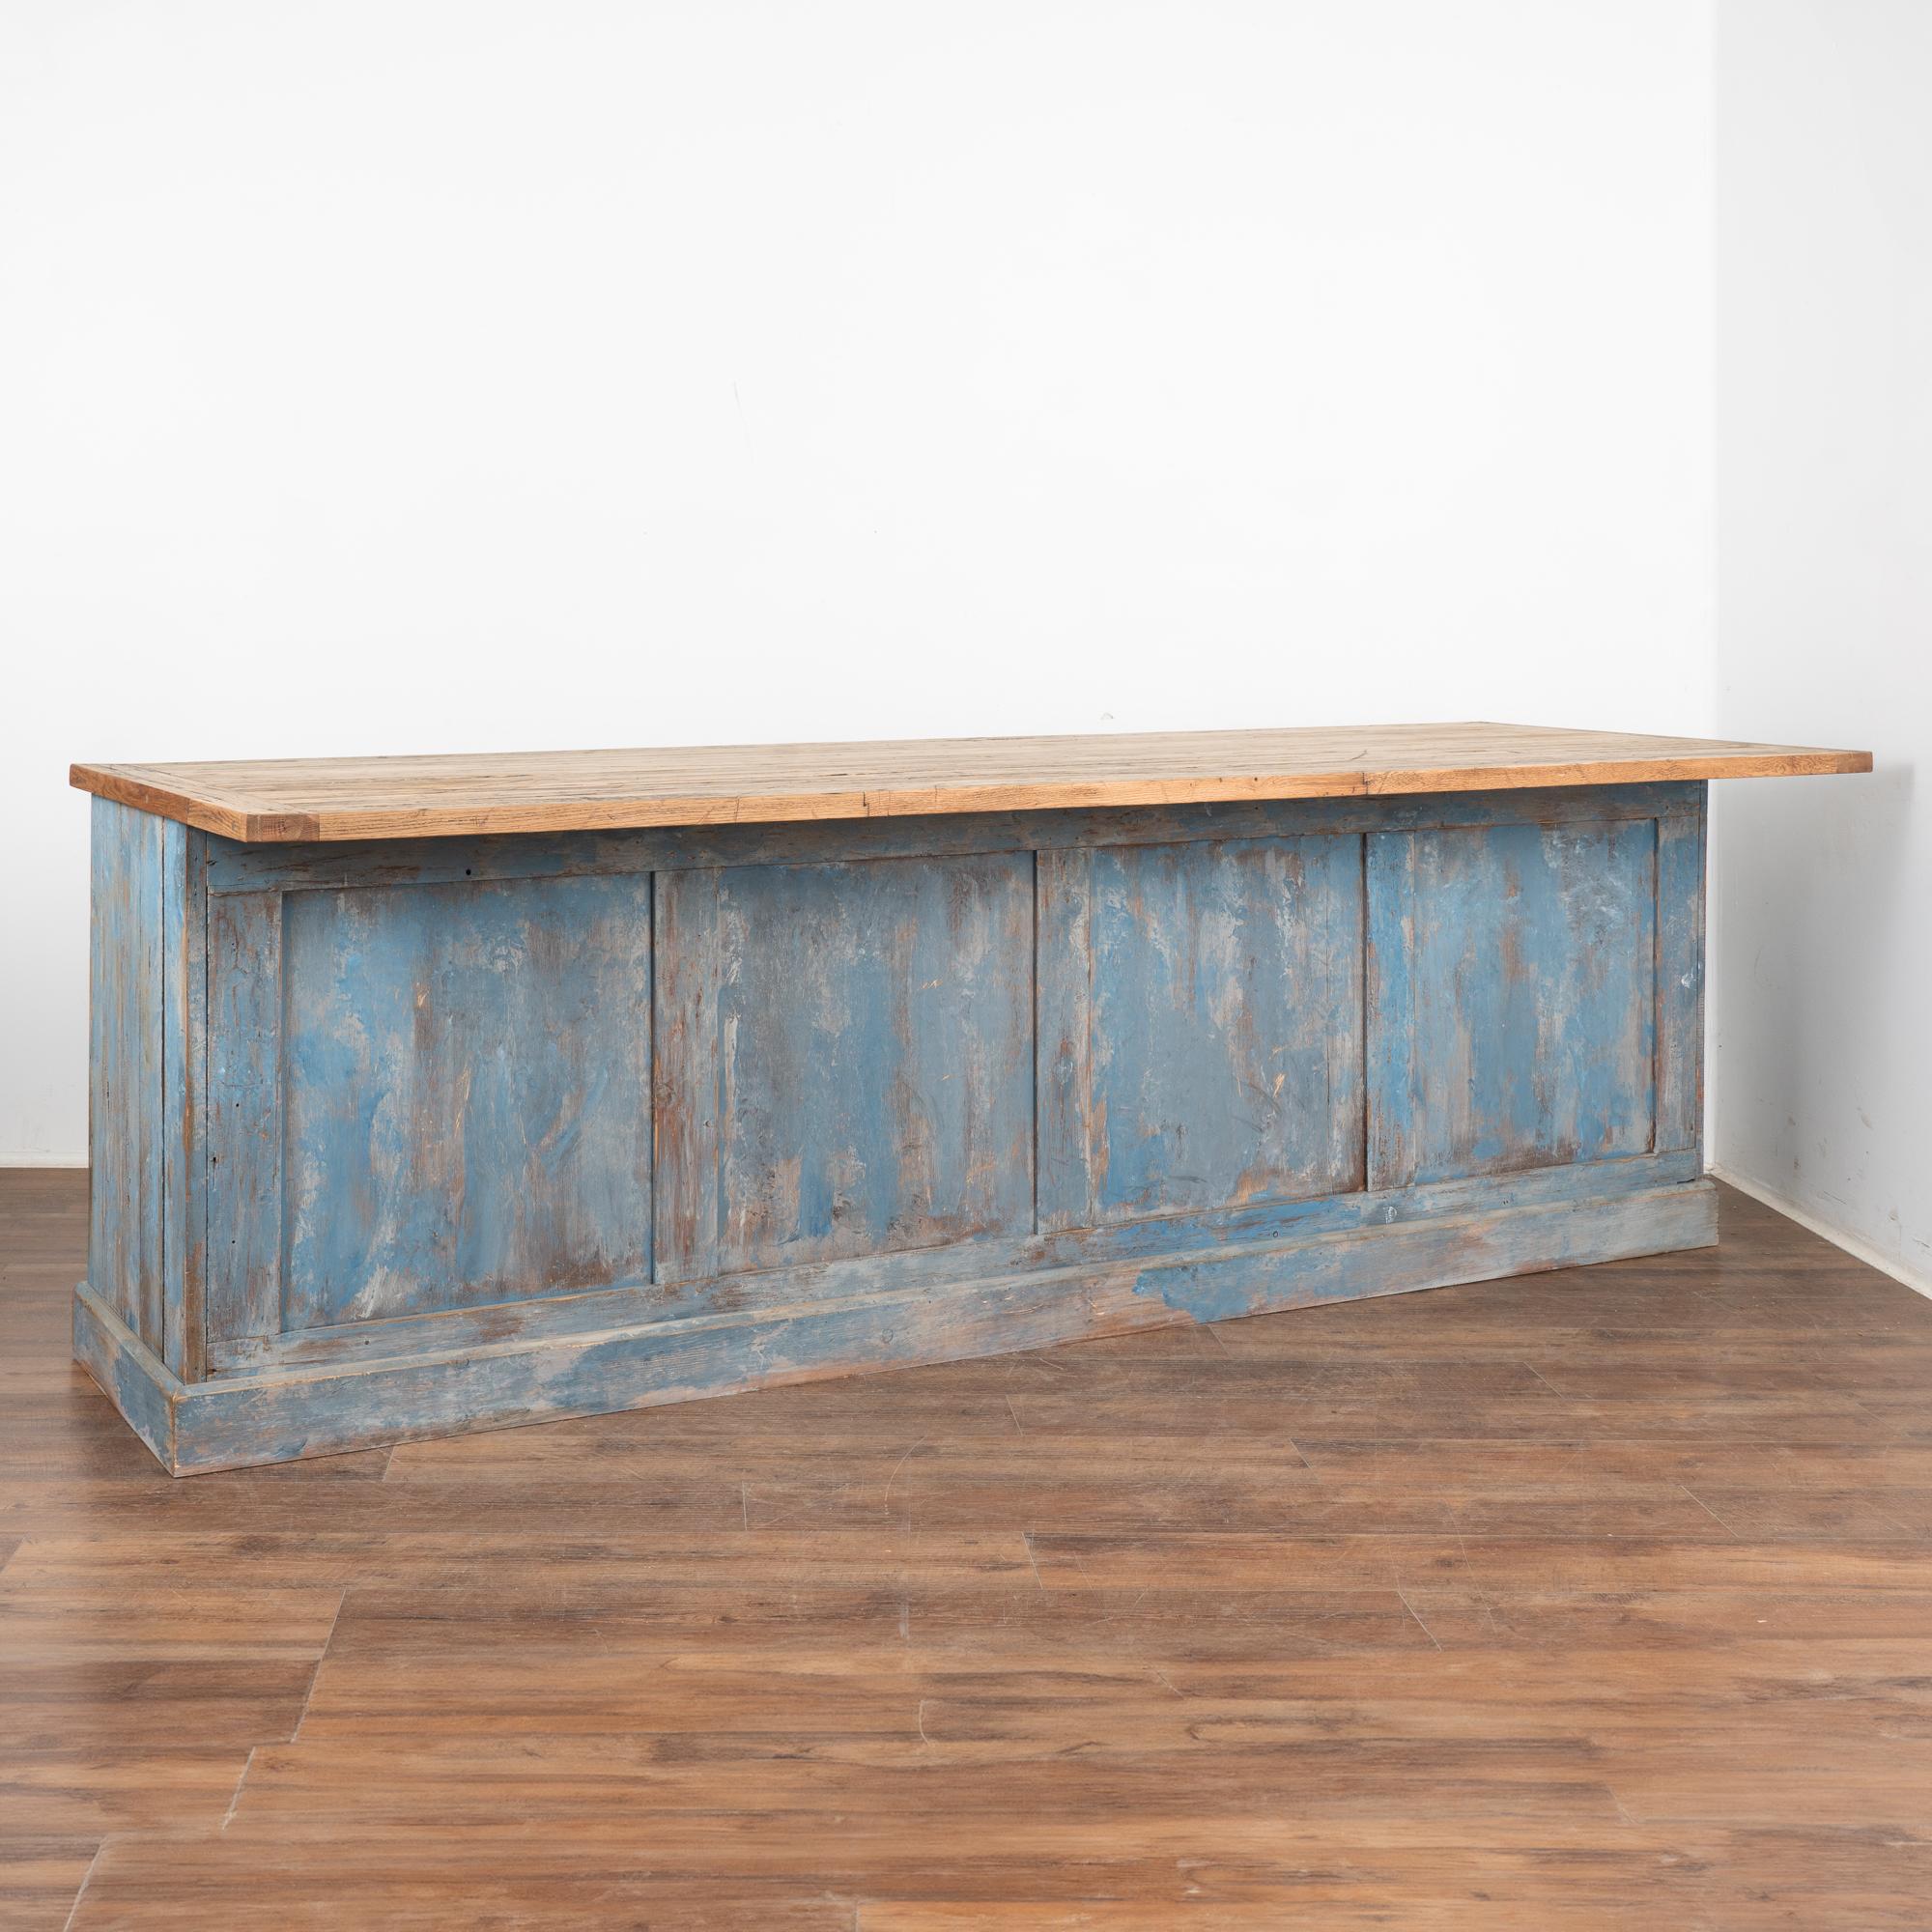 This old shop counter from Sweden will serve well as a modern 9' kitchen island.
The top is made from old boxcar flooring (from a train); thick and heavy, it is filled with gouges and stains from years of use in train yards and provides a wonderful